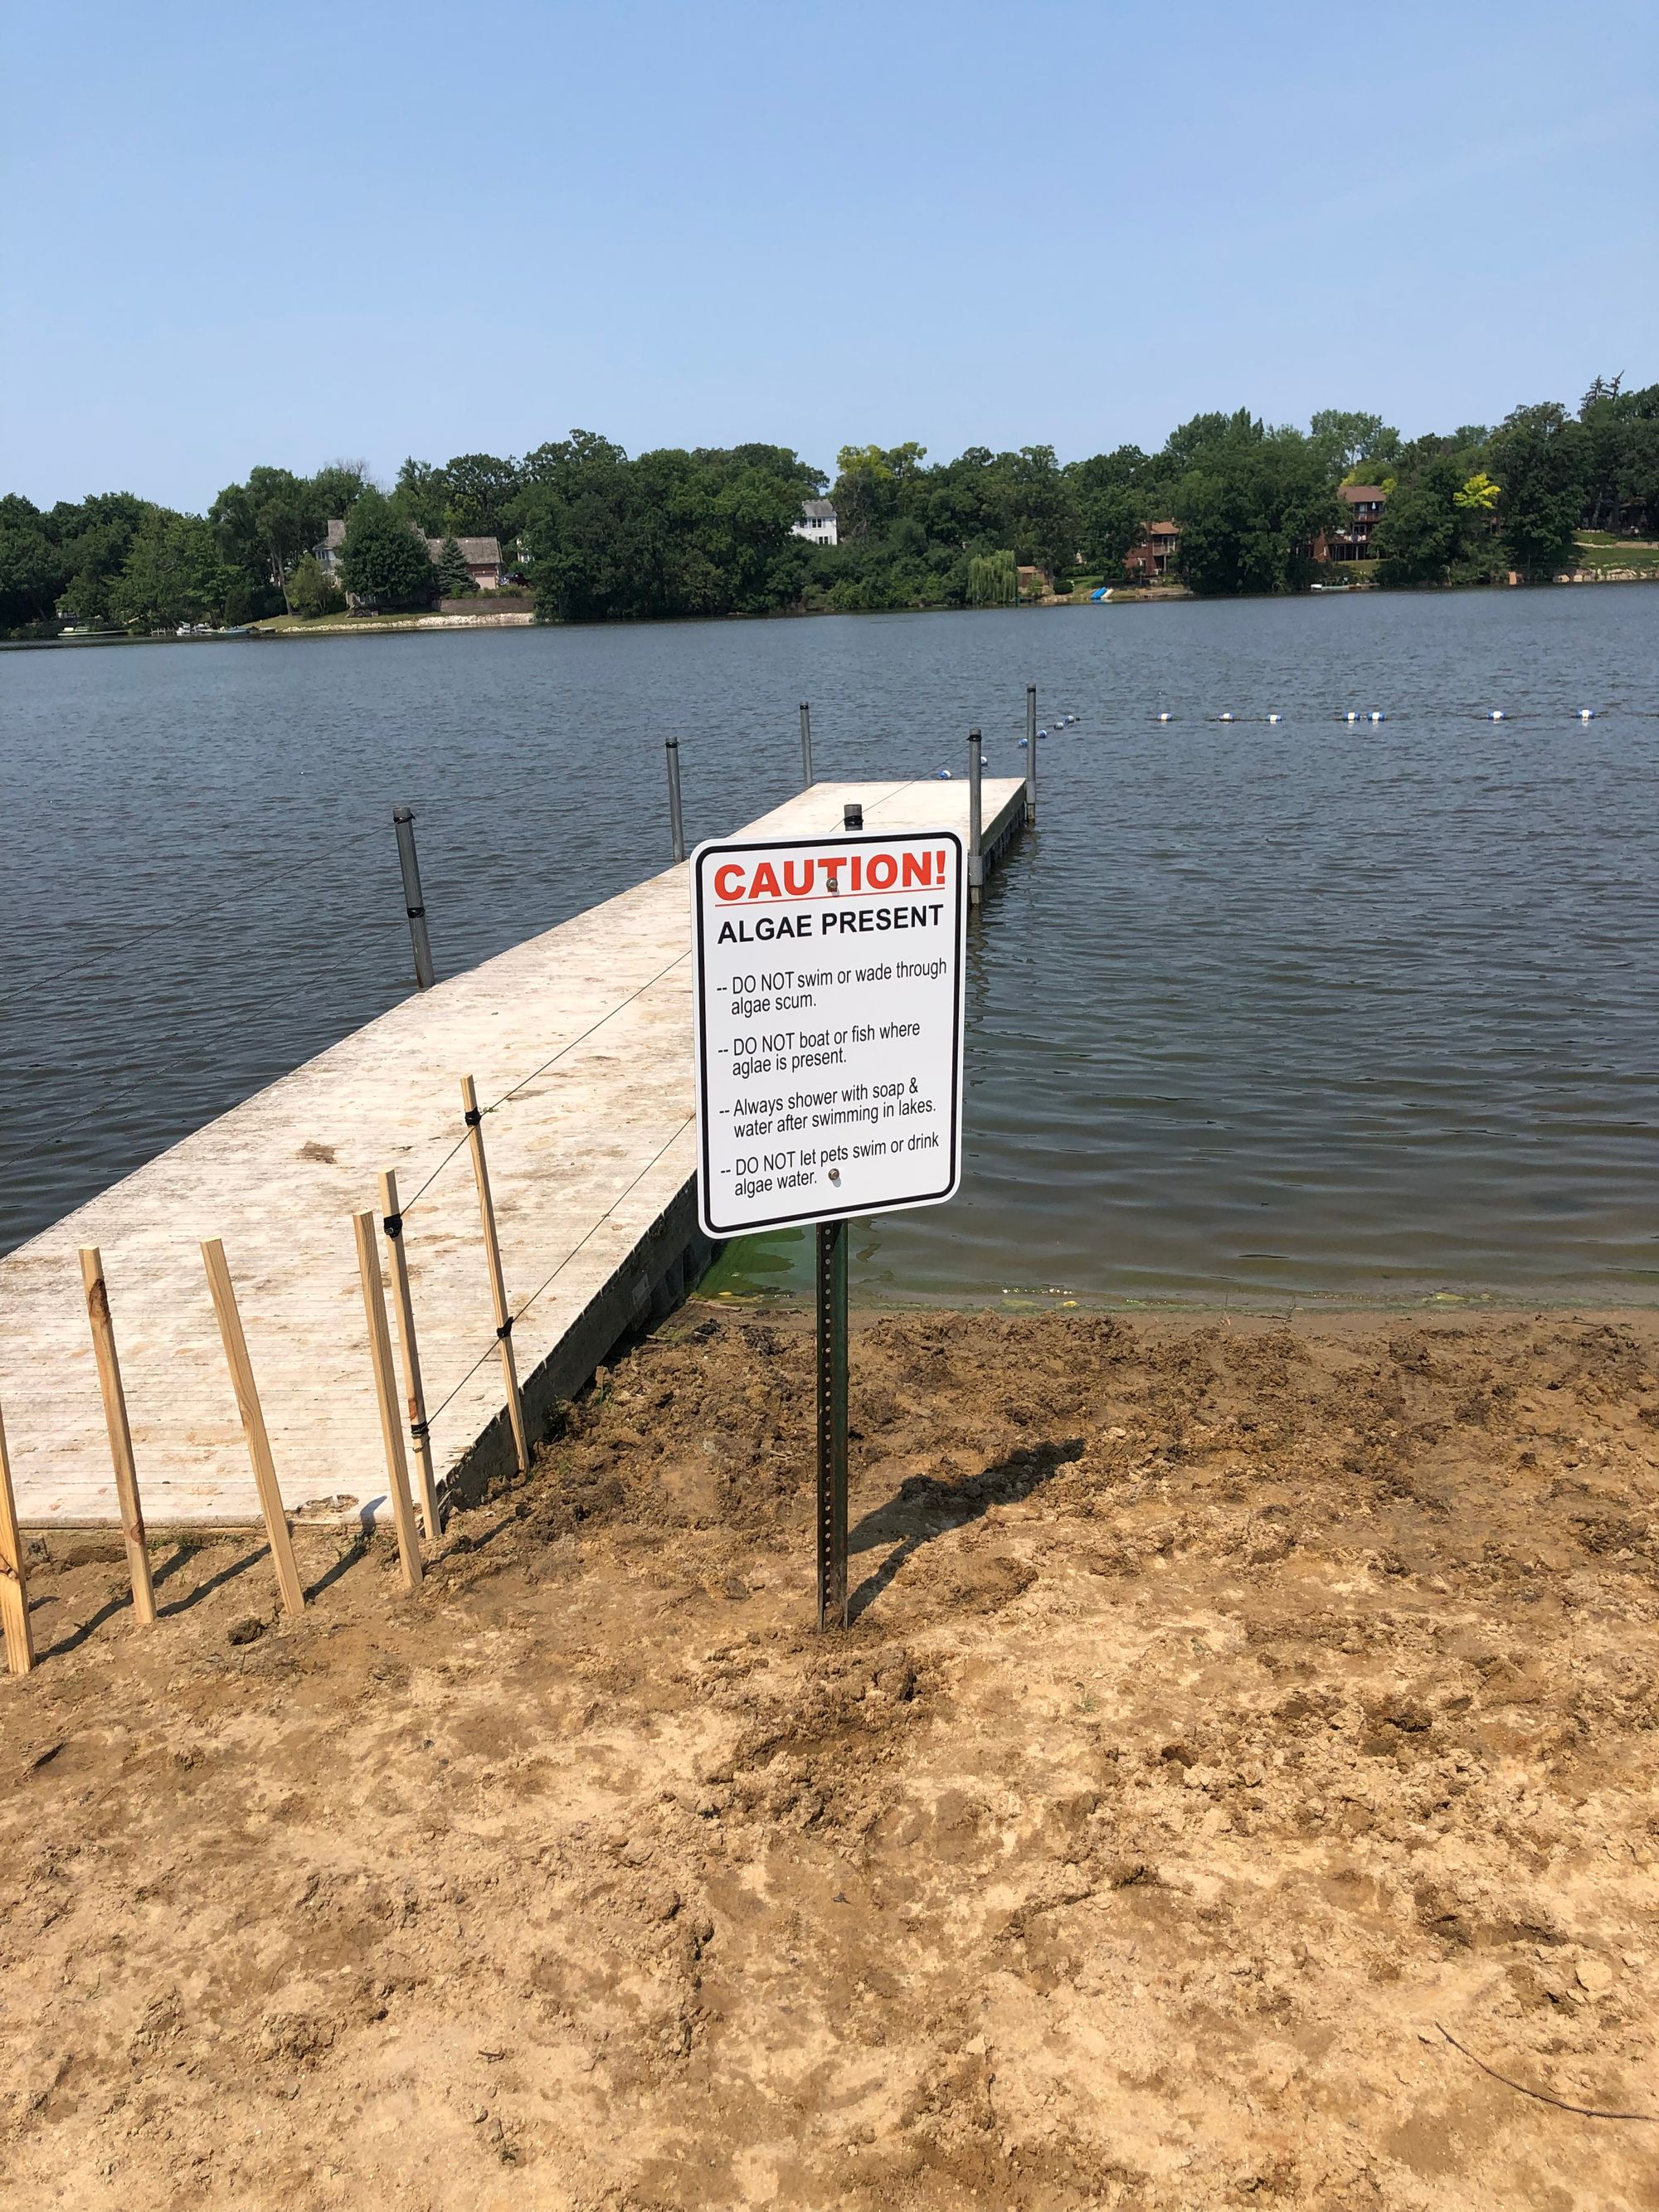 The swim area is clear of algae and the caution sign has been taken down.